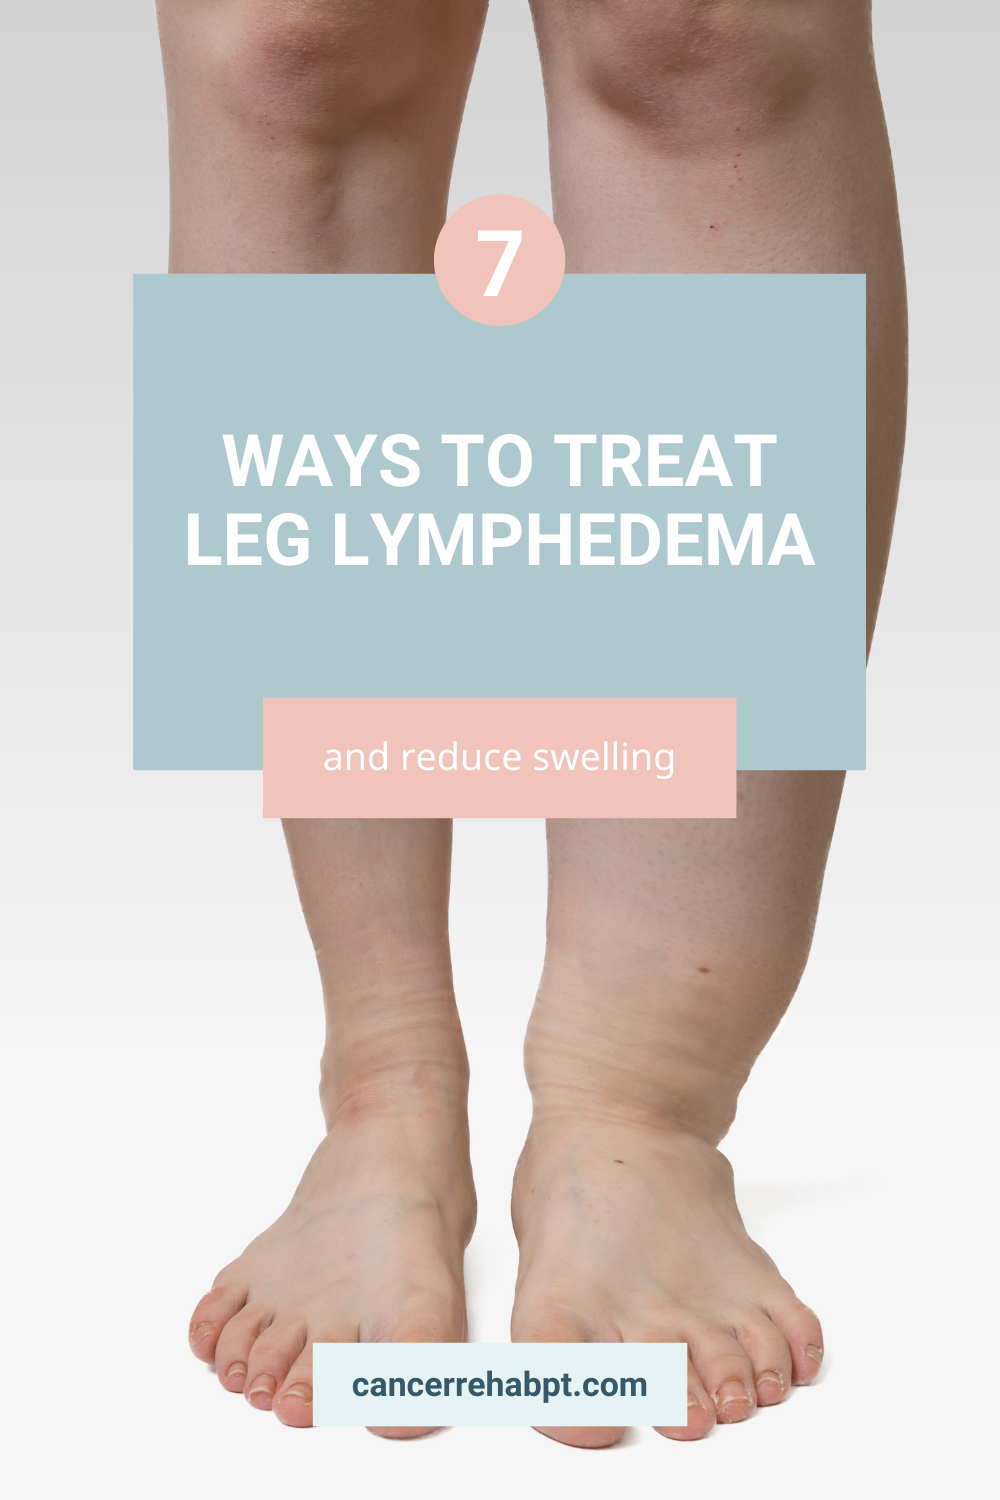 Cancer Rehab Pt — 7 Ways To Treat Leg Lymphedema And Reduce Swelling